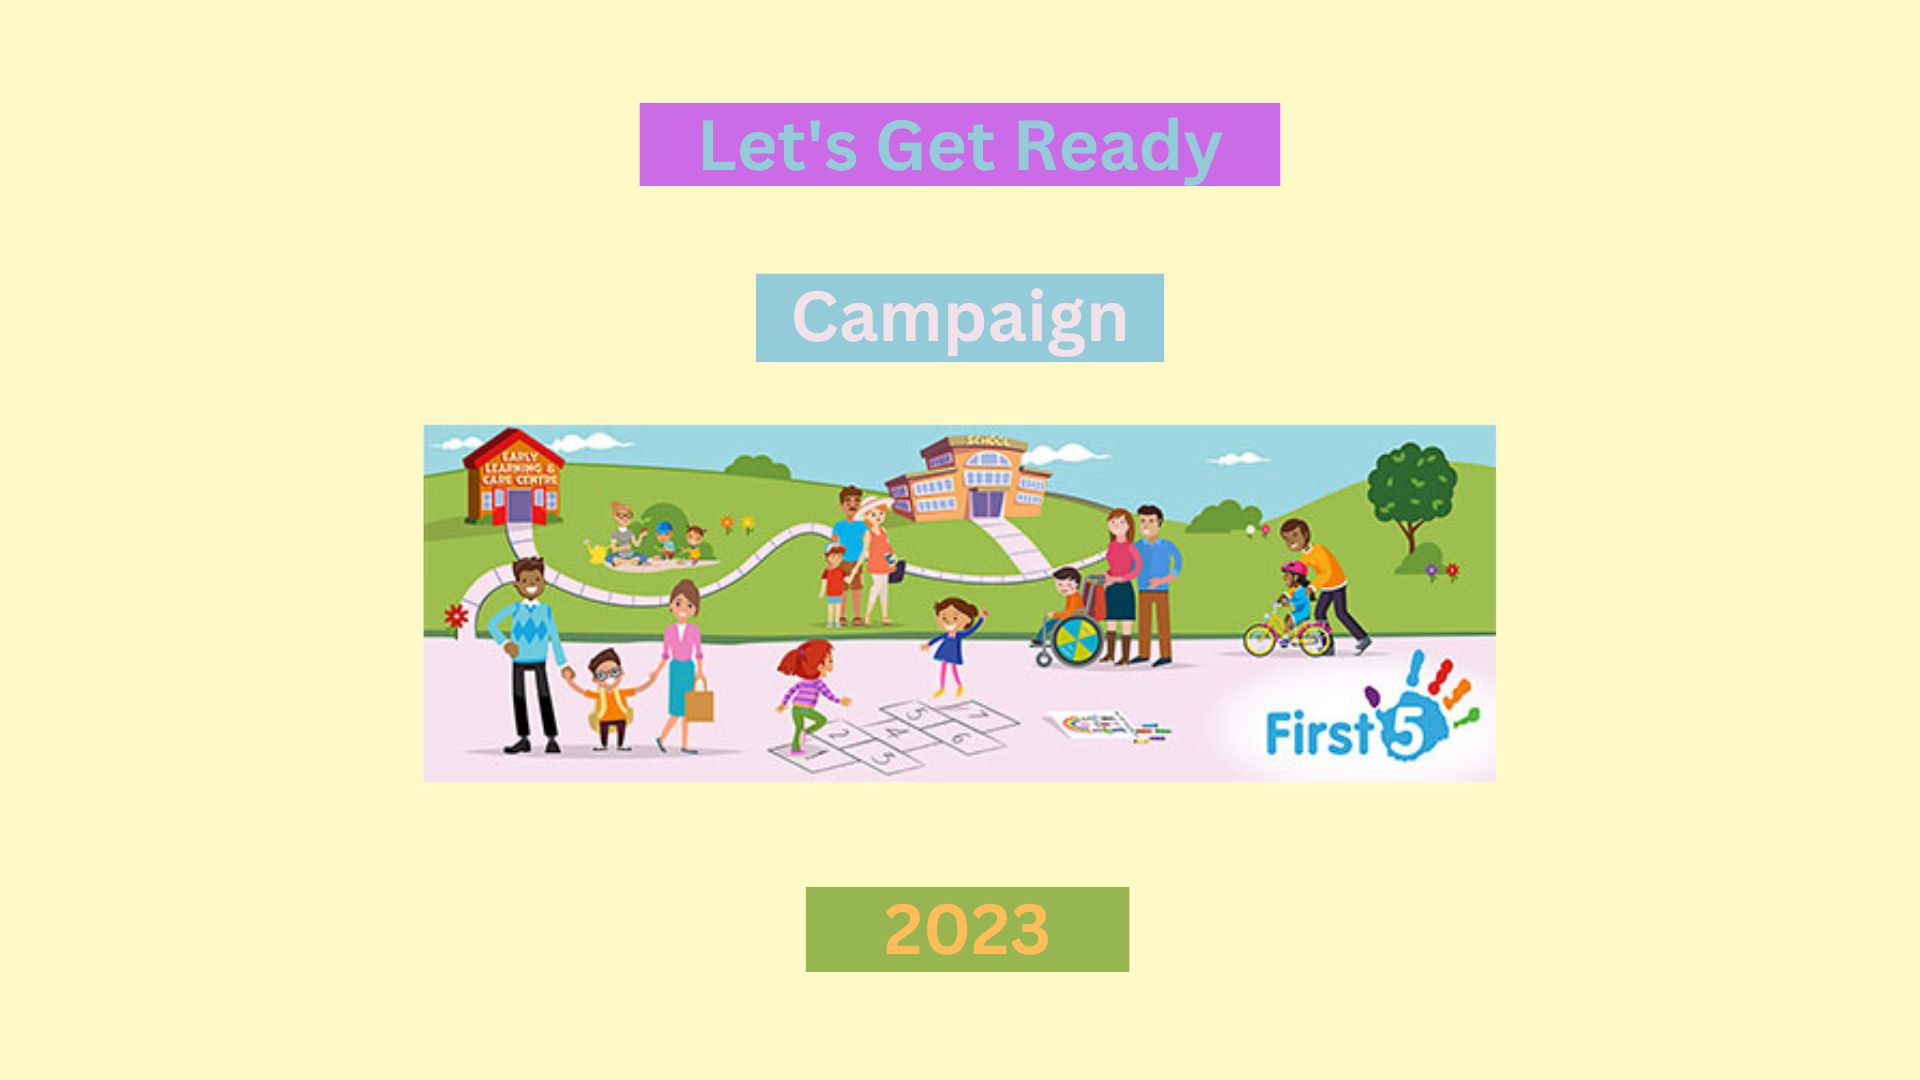 Let’s Get Ready Campaign 2023